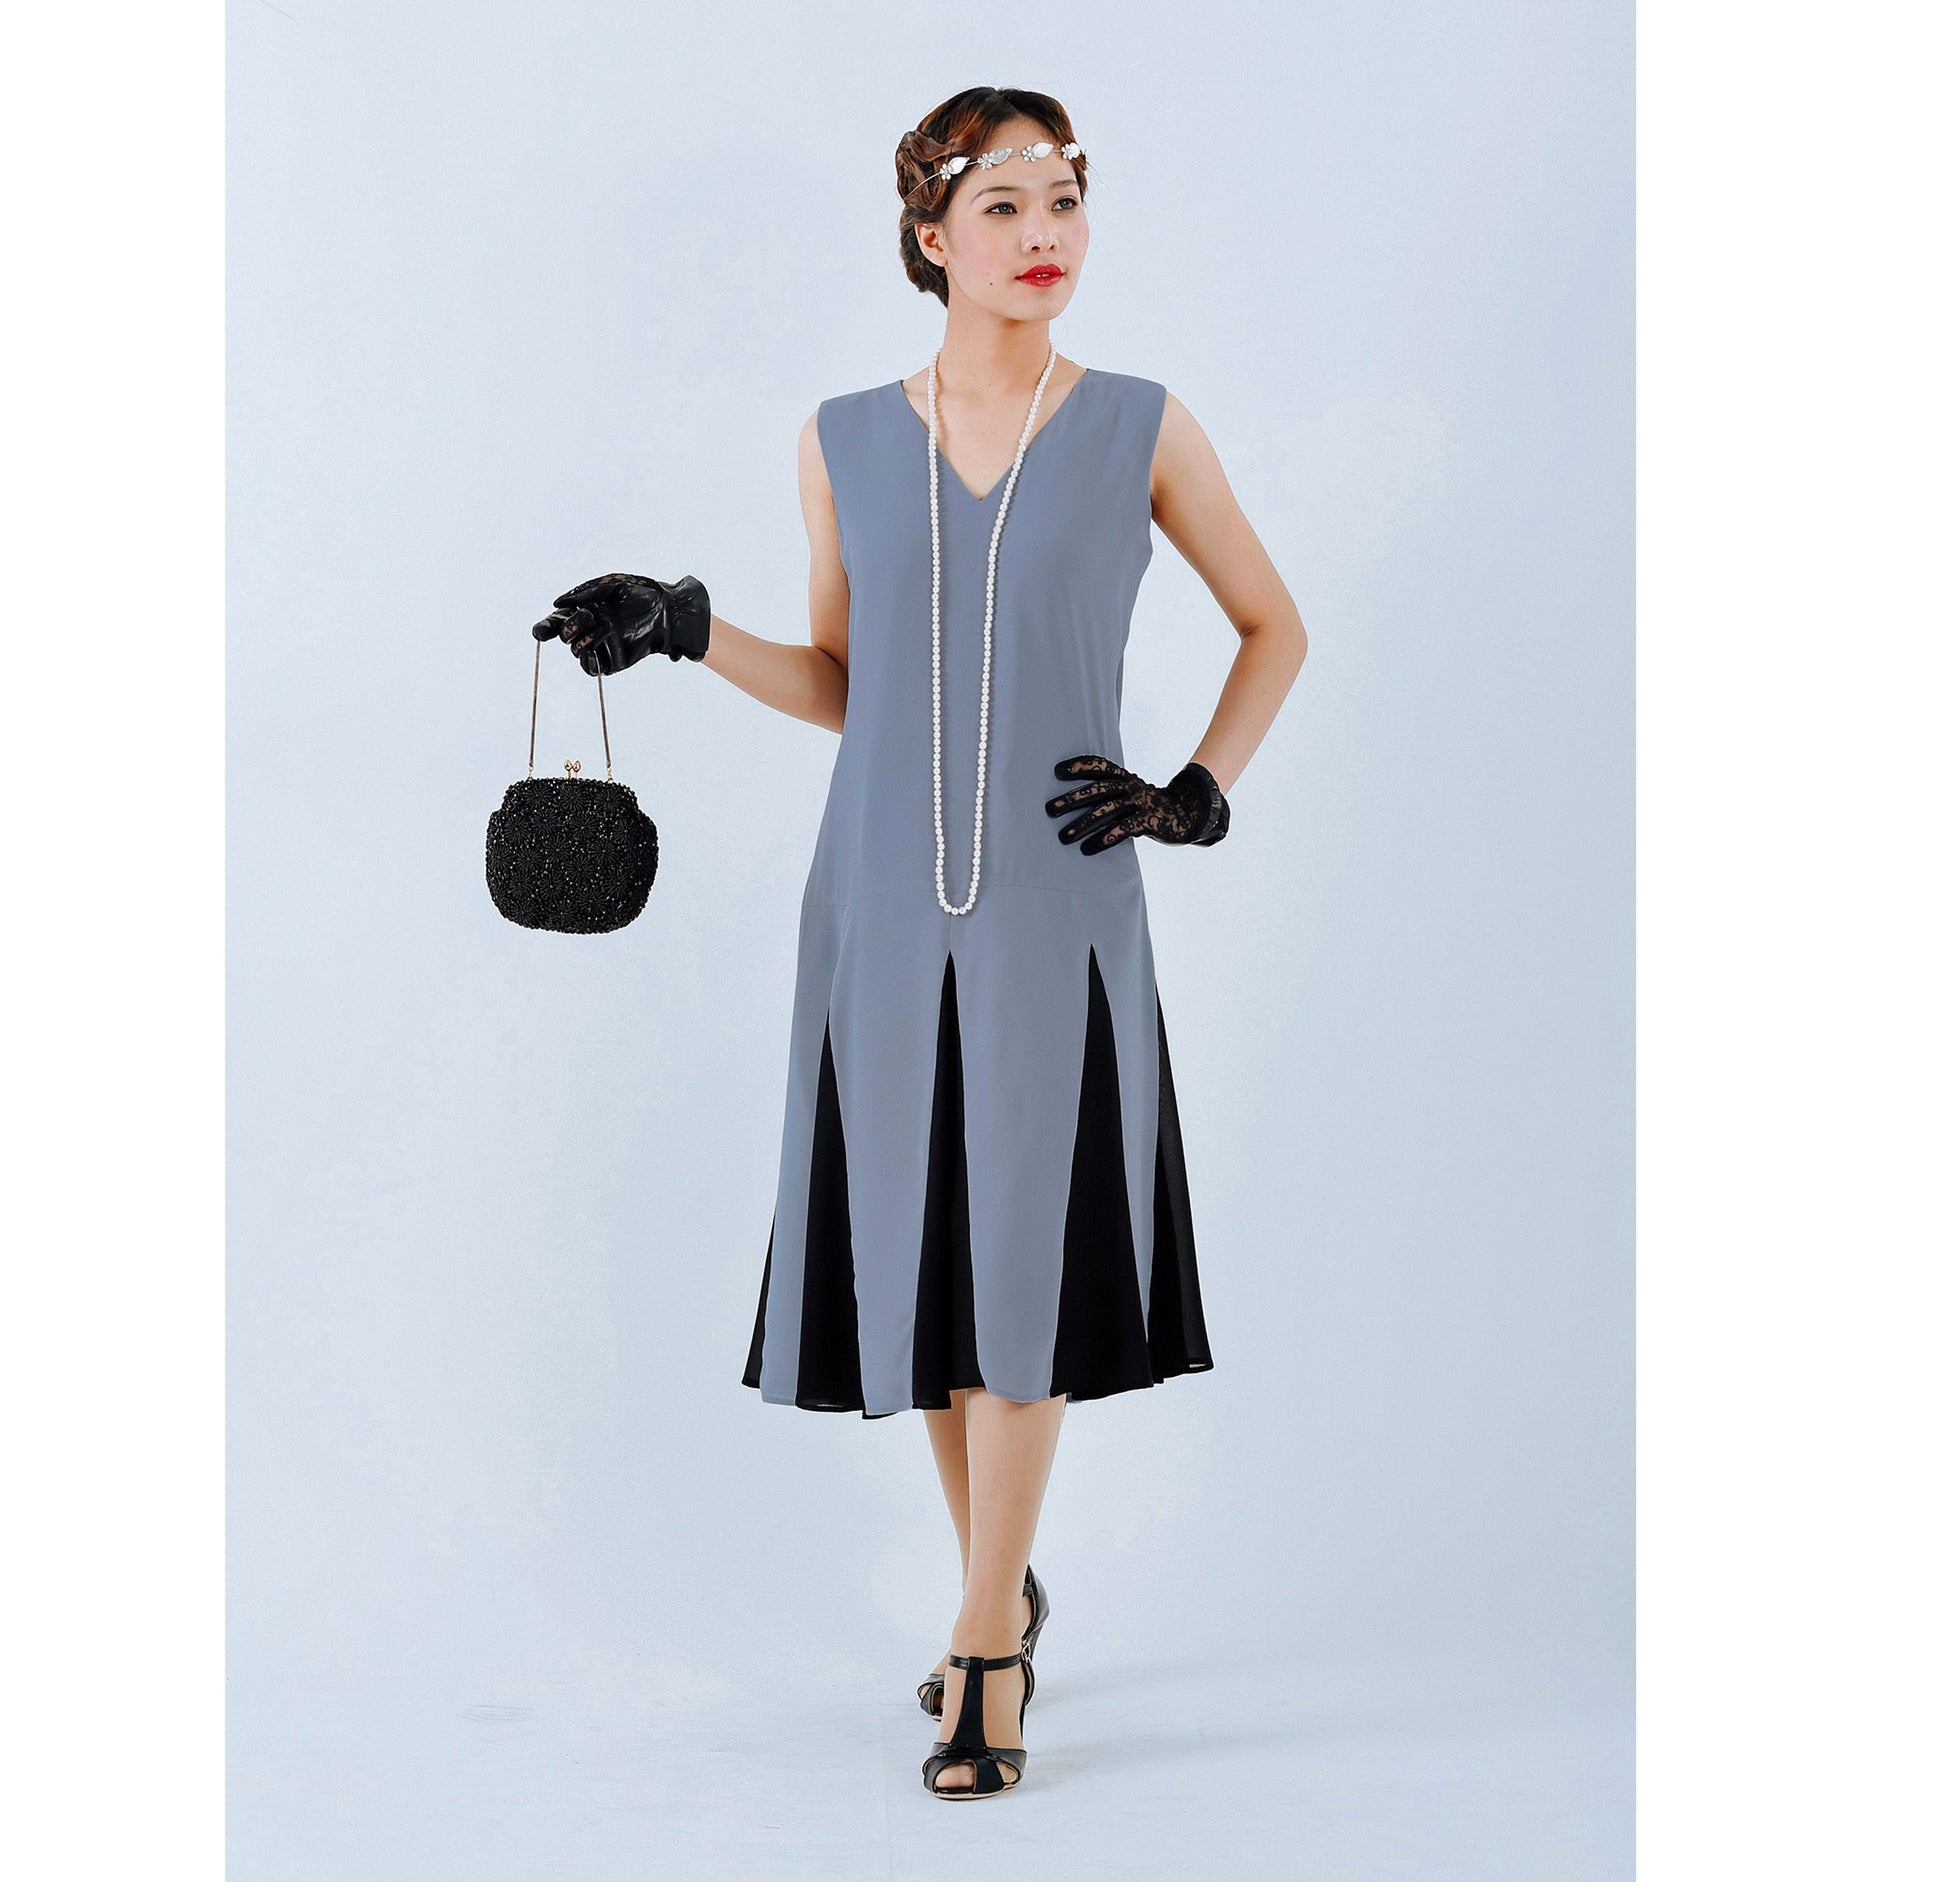 Grey or Black 1920s Gatsby dress with contrast godets - a vintage-inspired Roaring Twenties dress